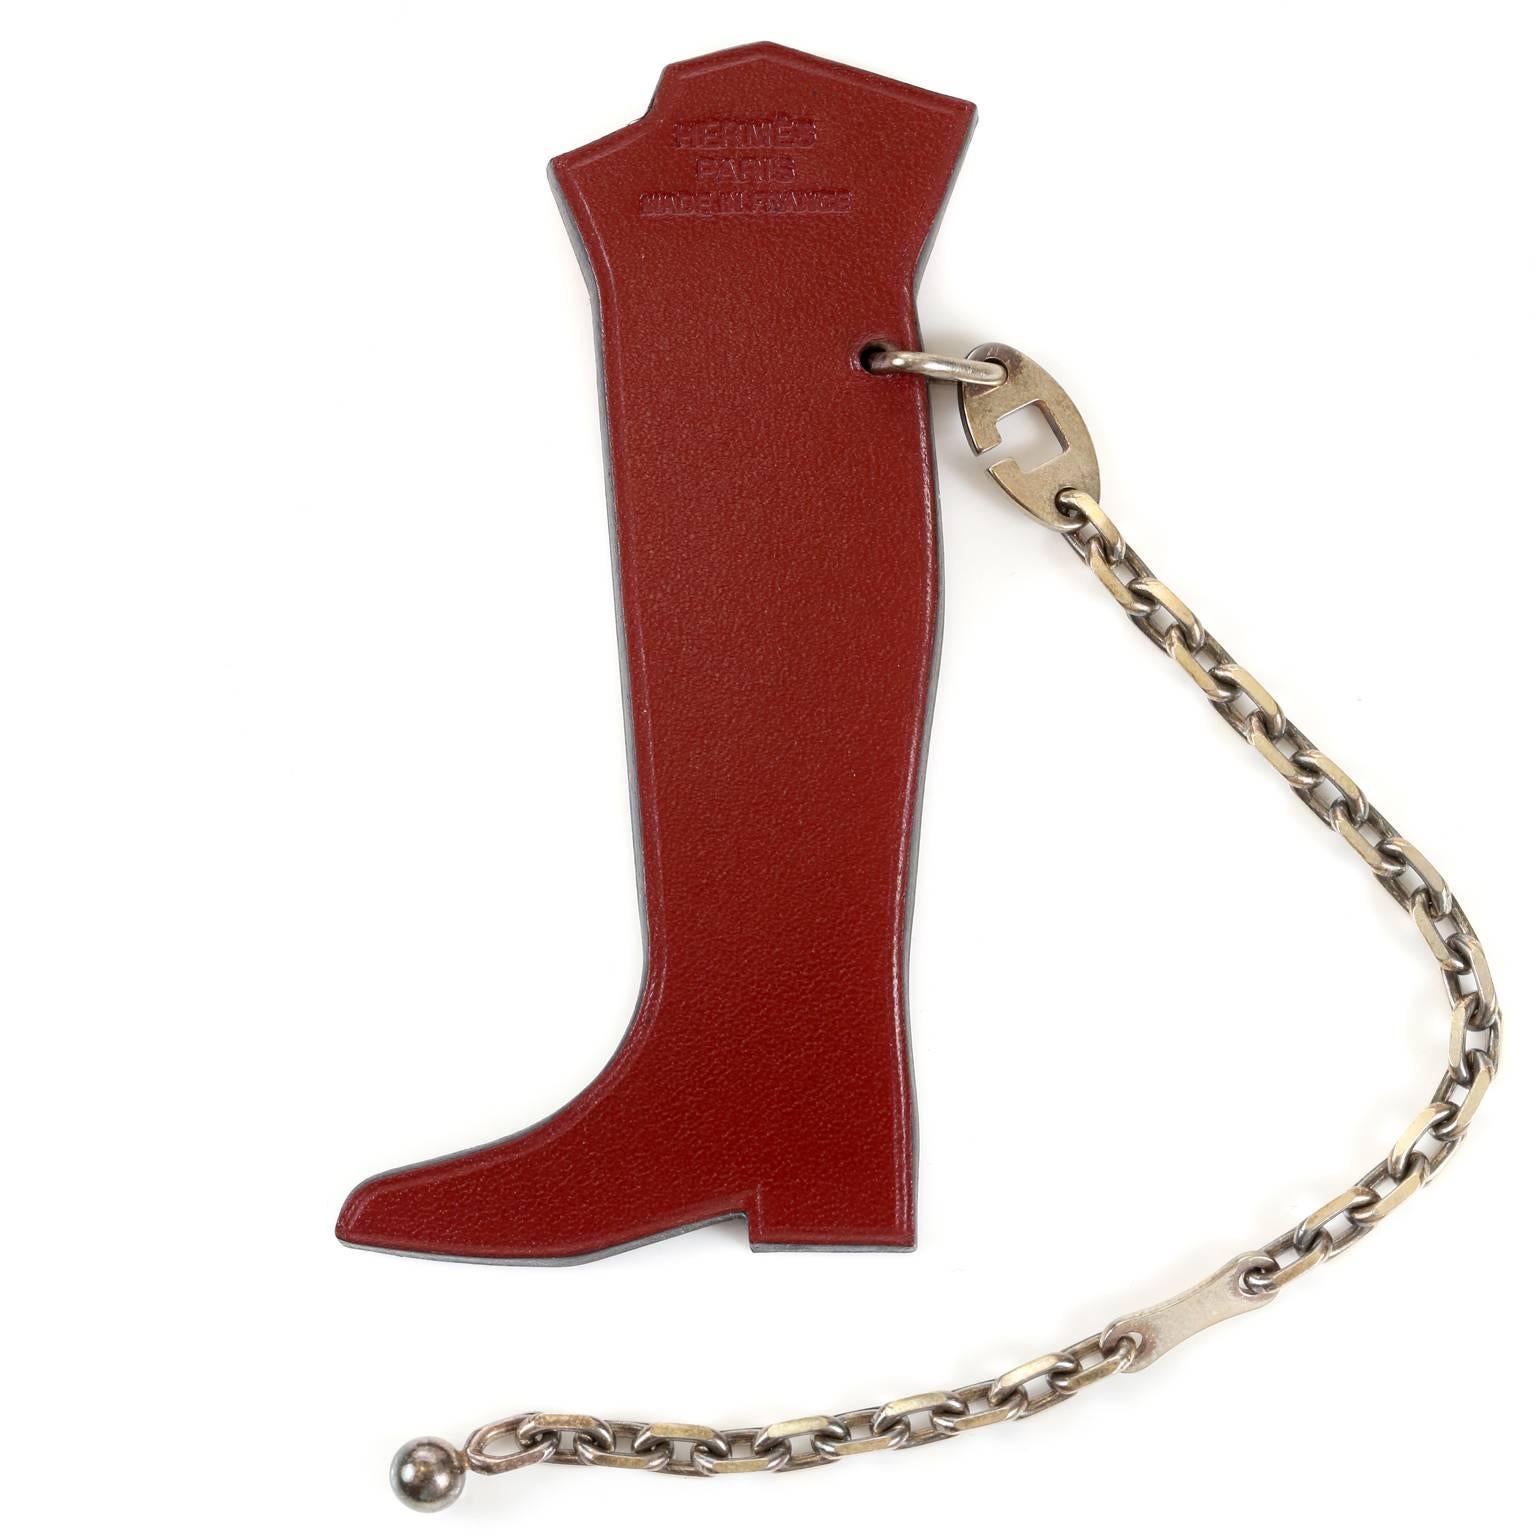 Hermès Hotte Botte Leather Keychain- MINT condition with the original box
  Burgundy veau box equestrian boot is stuffed with colorful gifts.  Silver tone chain attaches to a bag or keys. Rare, iconic and collectible. Made in France.
A197
